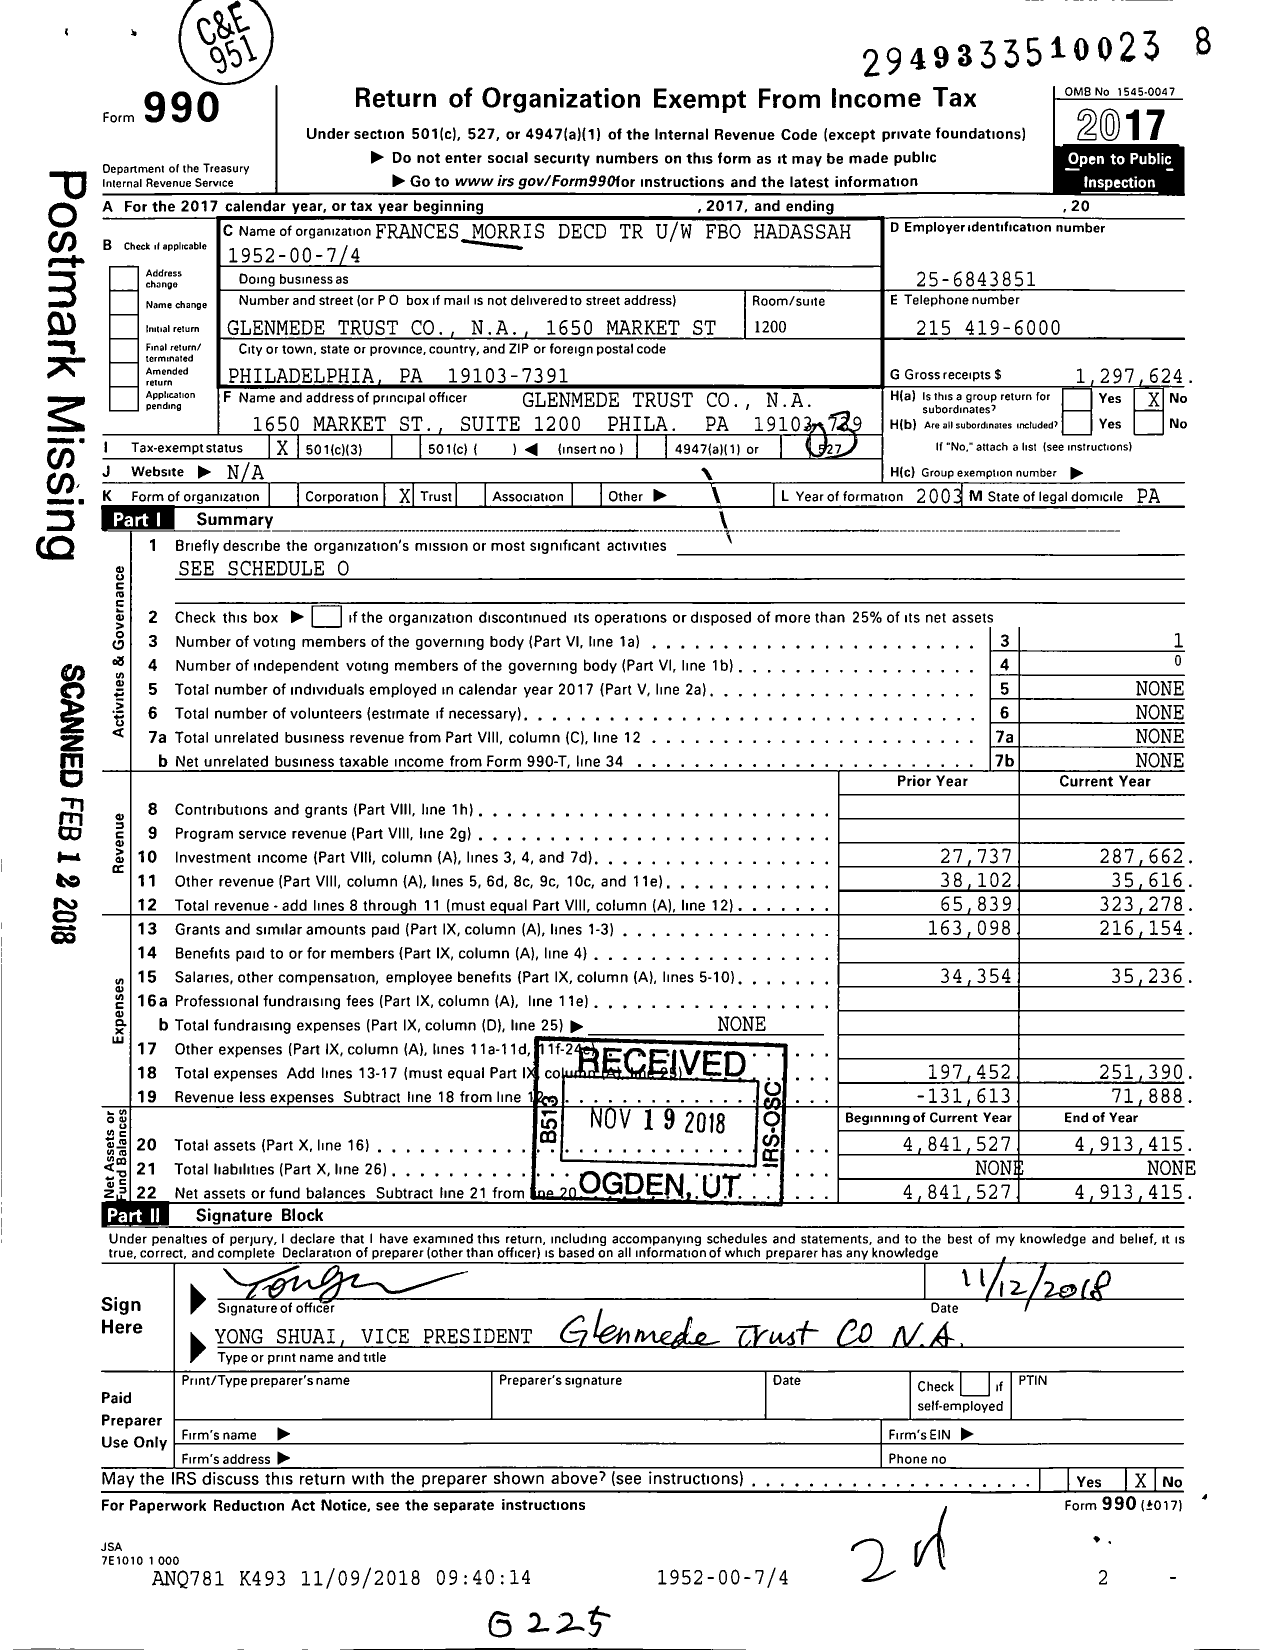 Image of first page of 2017 Form 990 for Frances Morris Decd TR Uw Fbo Hadassah